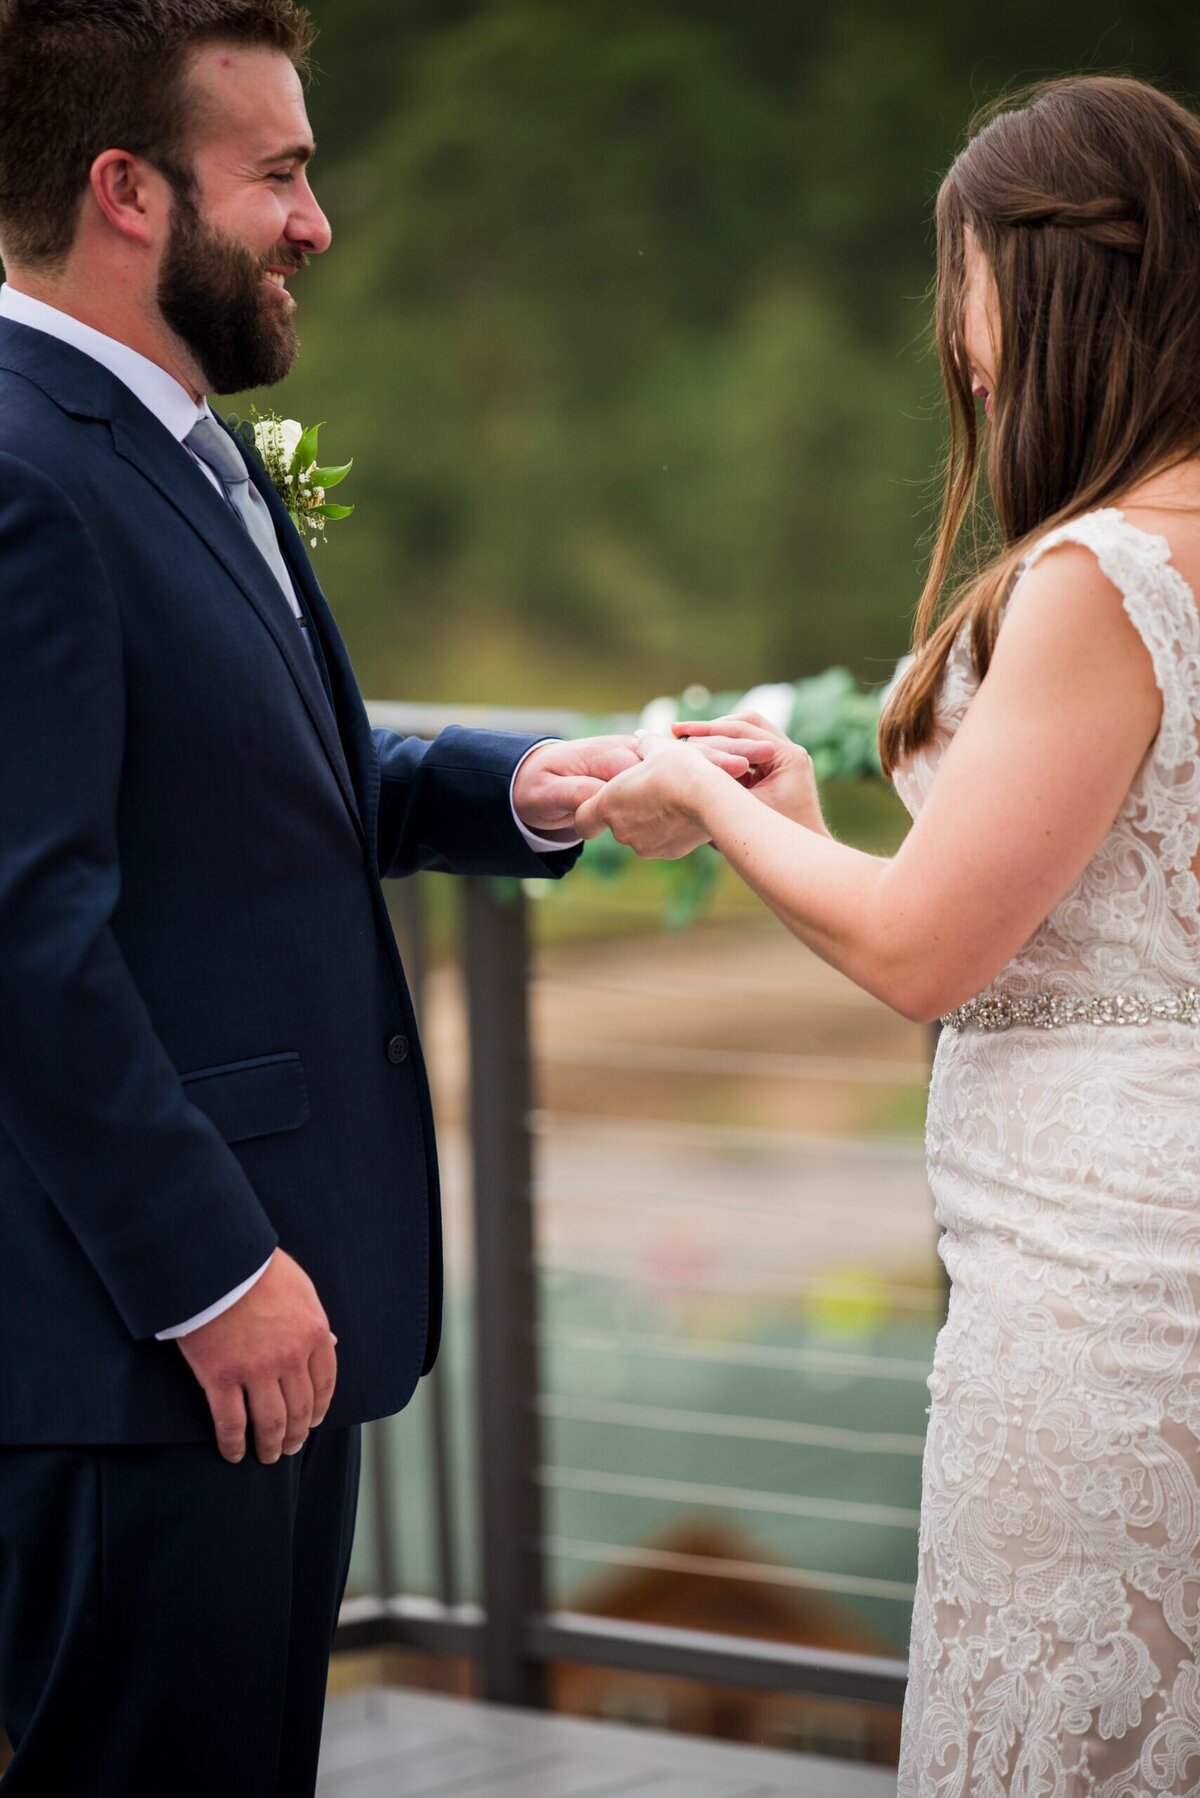 A close up shot of a bride placing the wedding band on her groom's finger.